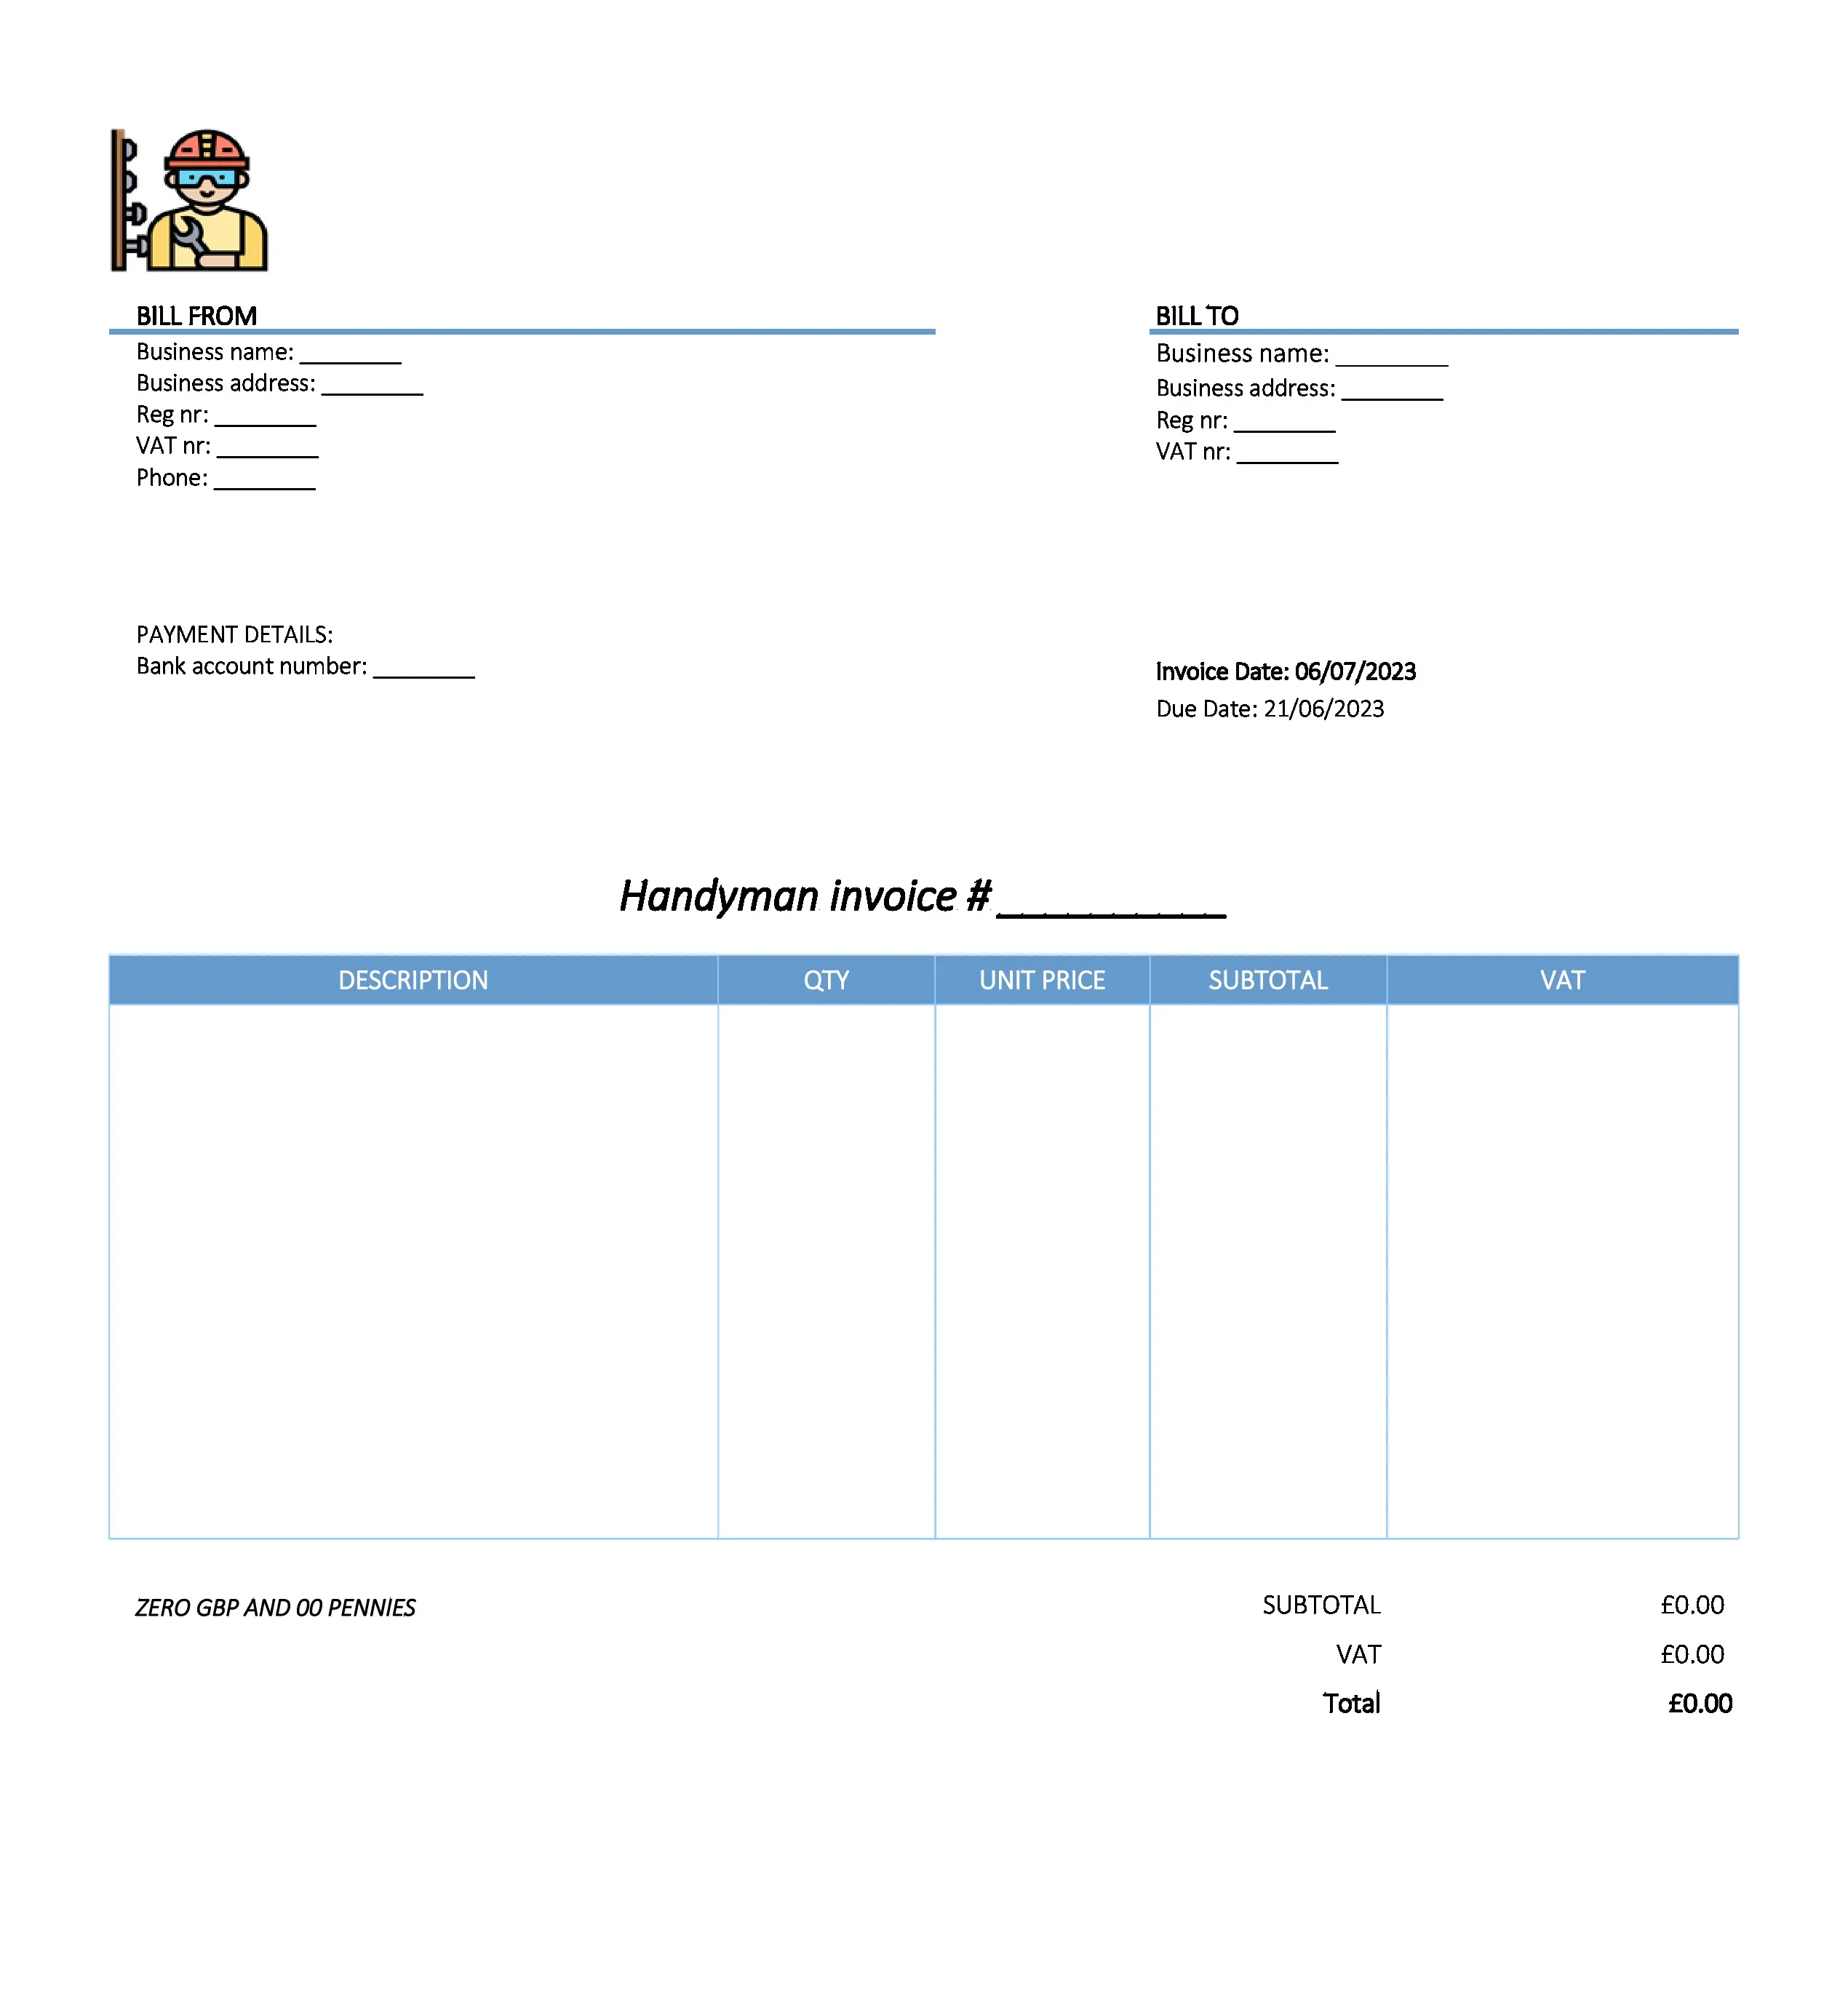 with bank details handyman invoice template UK Excel / Google sheets